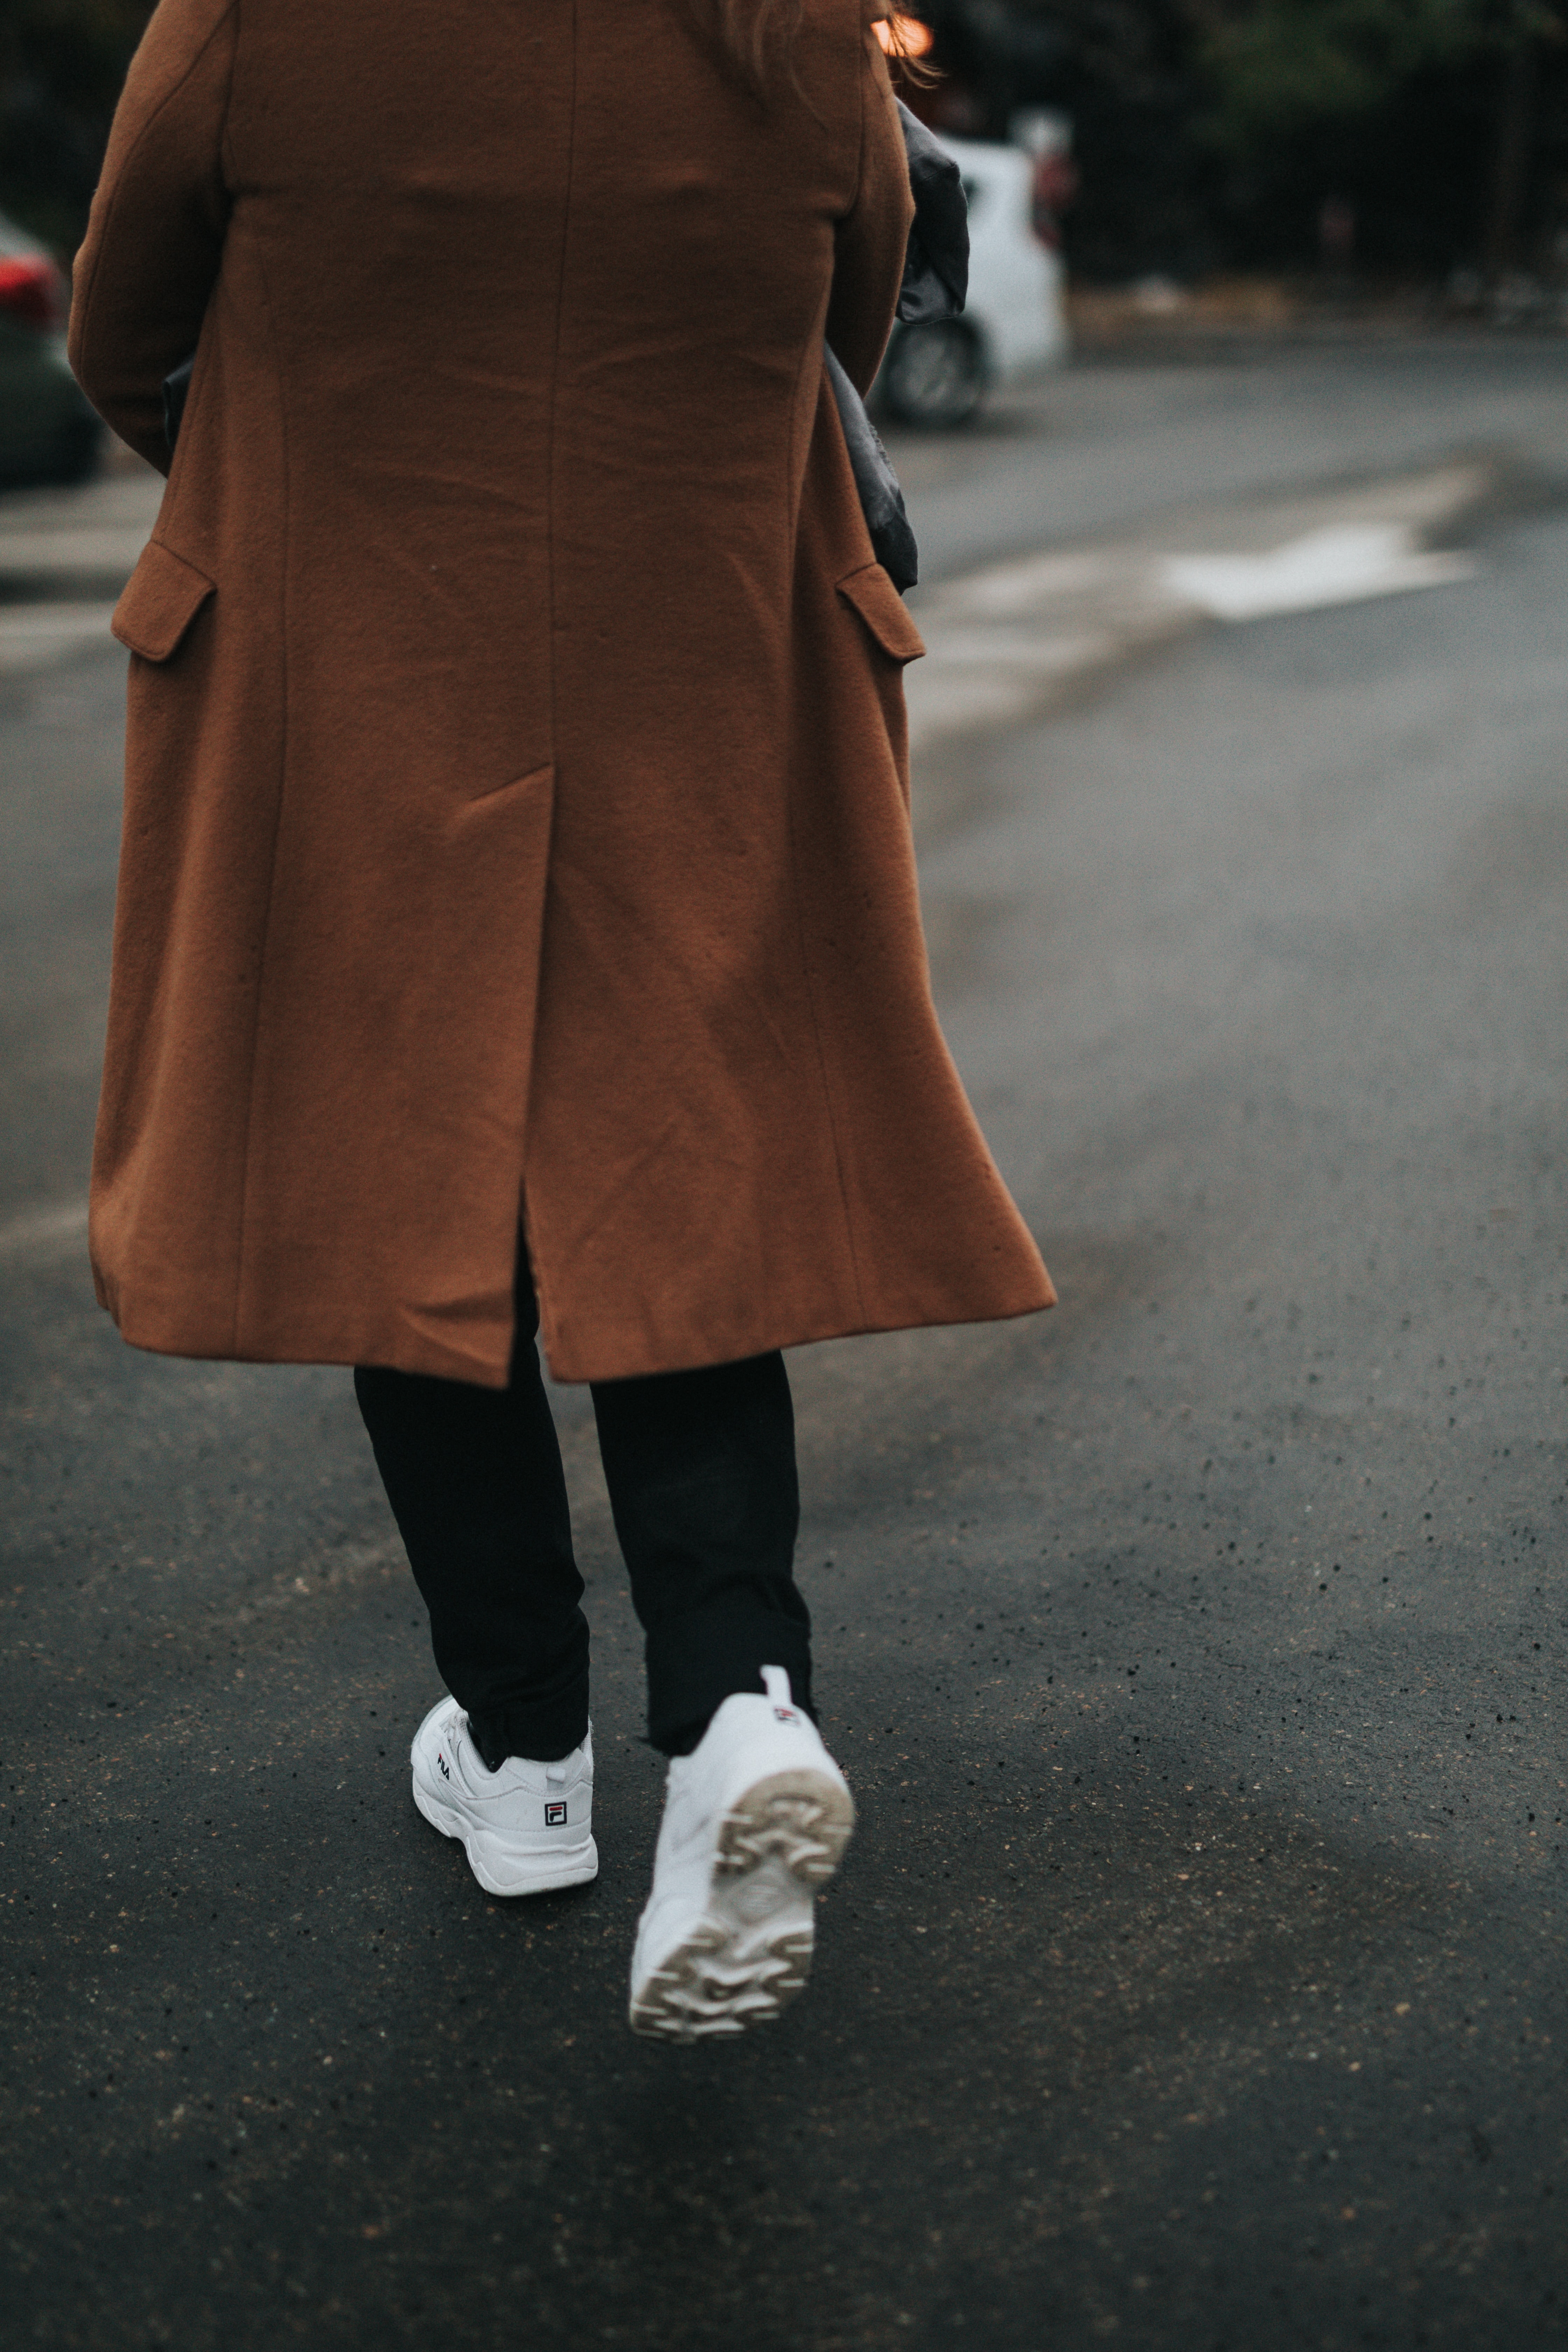 miscellanea, miscellaneous, sneakers, style, human, person, clothing, coat 5K